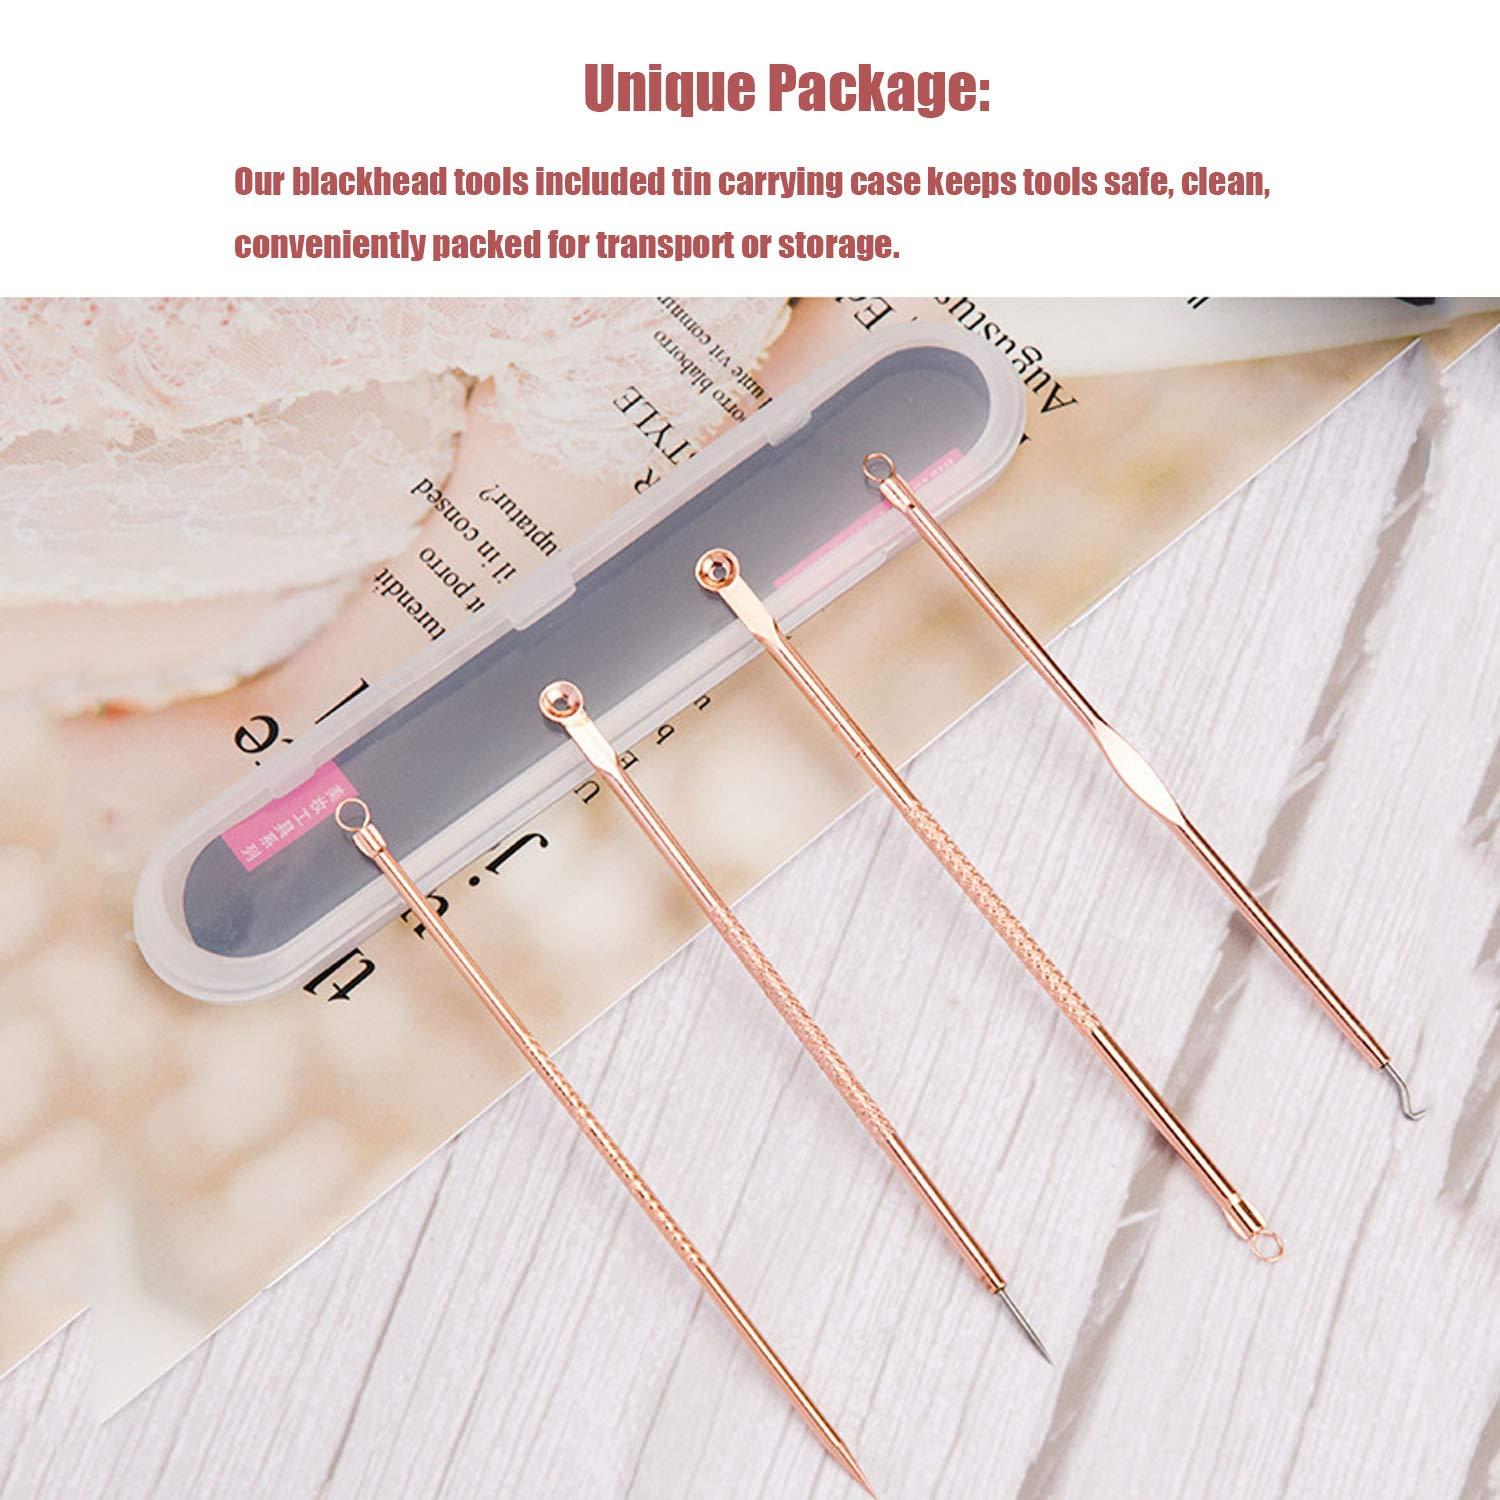 Blackhead Remover Pimple Comedone Extractor Tool Best Acne Removal Kit -  Treatment for Blemish Whitehead Popping Zit Removing for Risk Free Nose  Face Skin with Case (Rose 4 Piece Set)